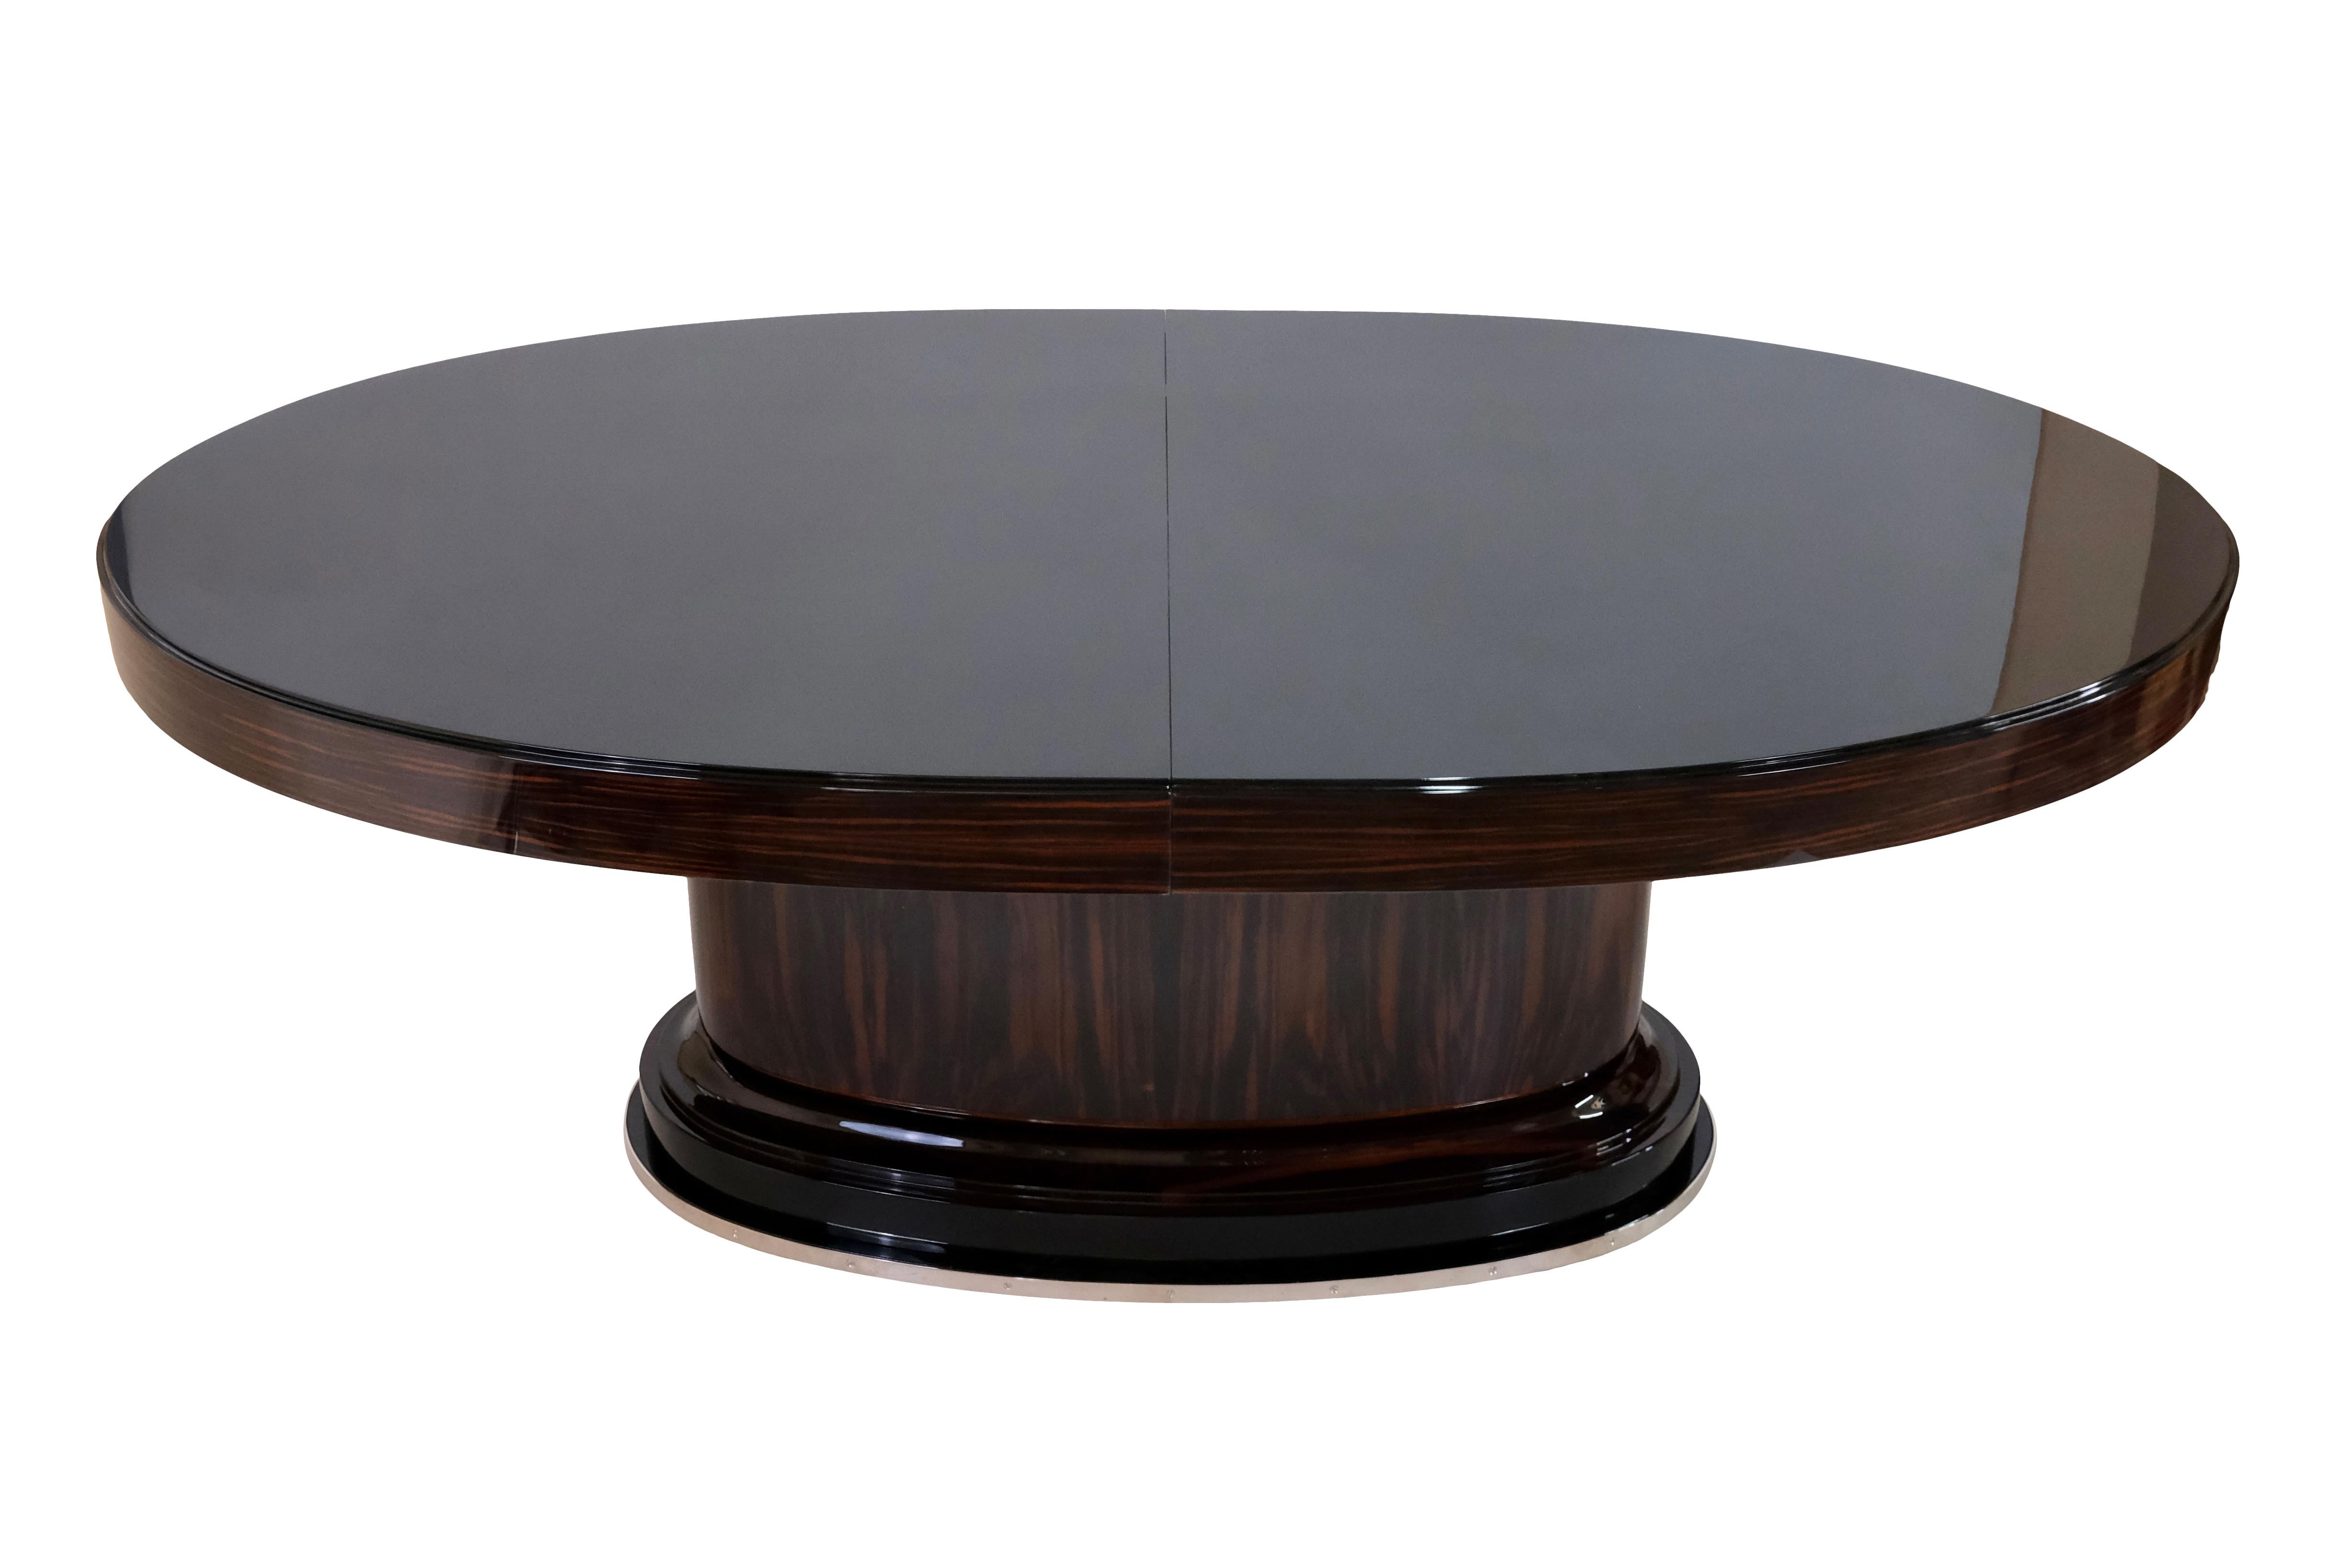 Large oval dining table with extension 
Macassar Veneer, high gloss lacquered 
One stable foot in the middle 
Base with nickeled Metal 
Tabletop in black piano lacquer, high gloss
The upper surface can be protected with a glass plate black in